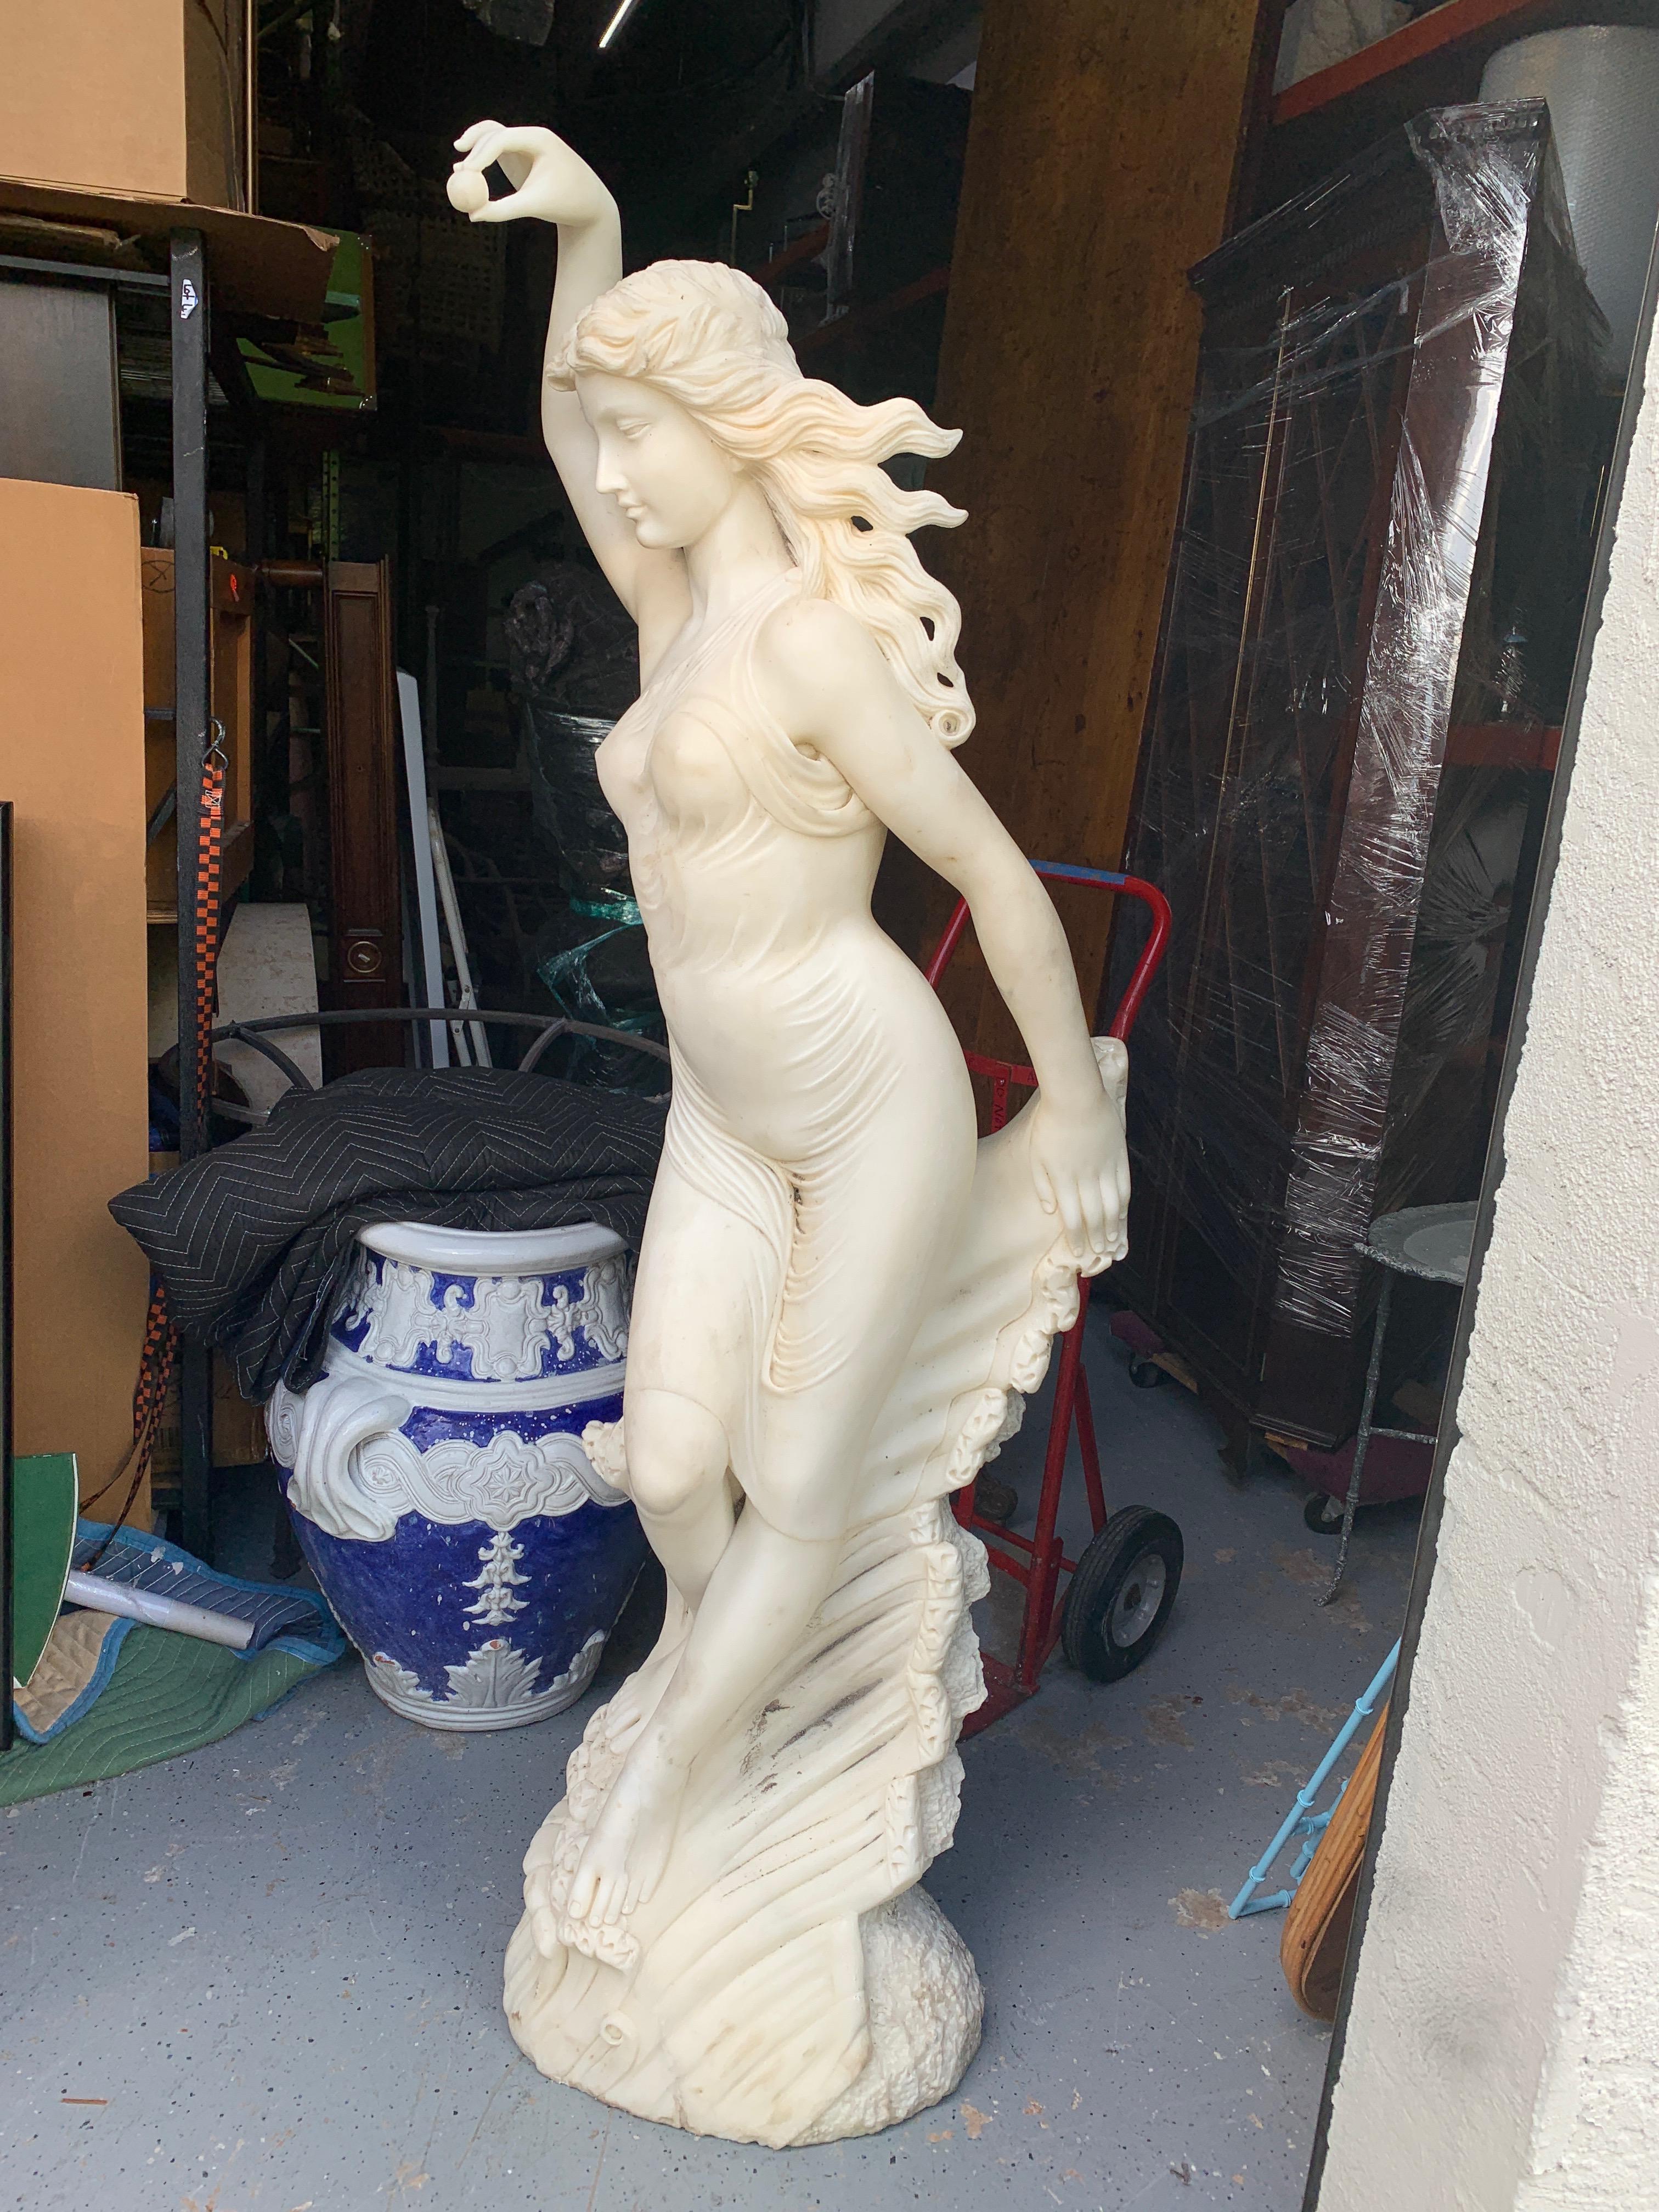 Life-size marble sculpture of Venus with Pearl, Provenance: Celine Dion
Well carved and detailed figure of Venus standing in the waves, holding a pearl, Unsigned. Ready to place inside or outside. Previously used at the pool see photo in situ. The